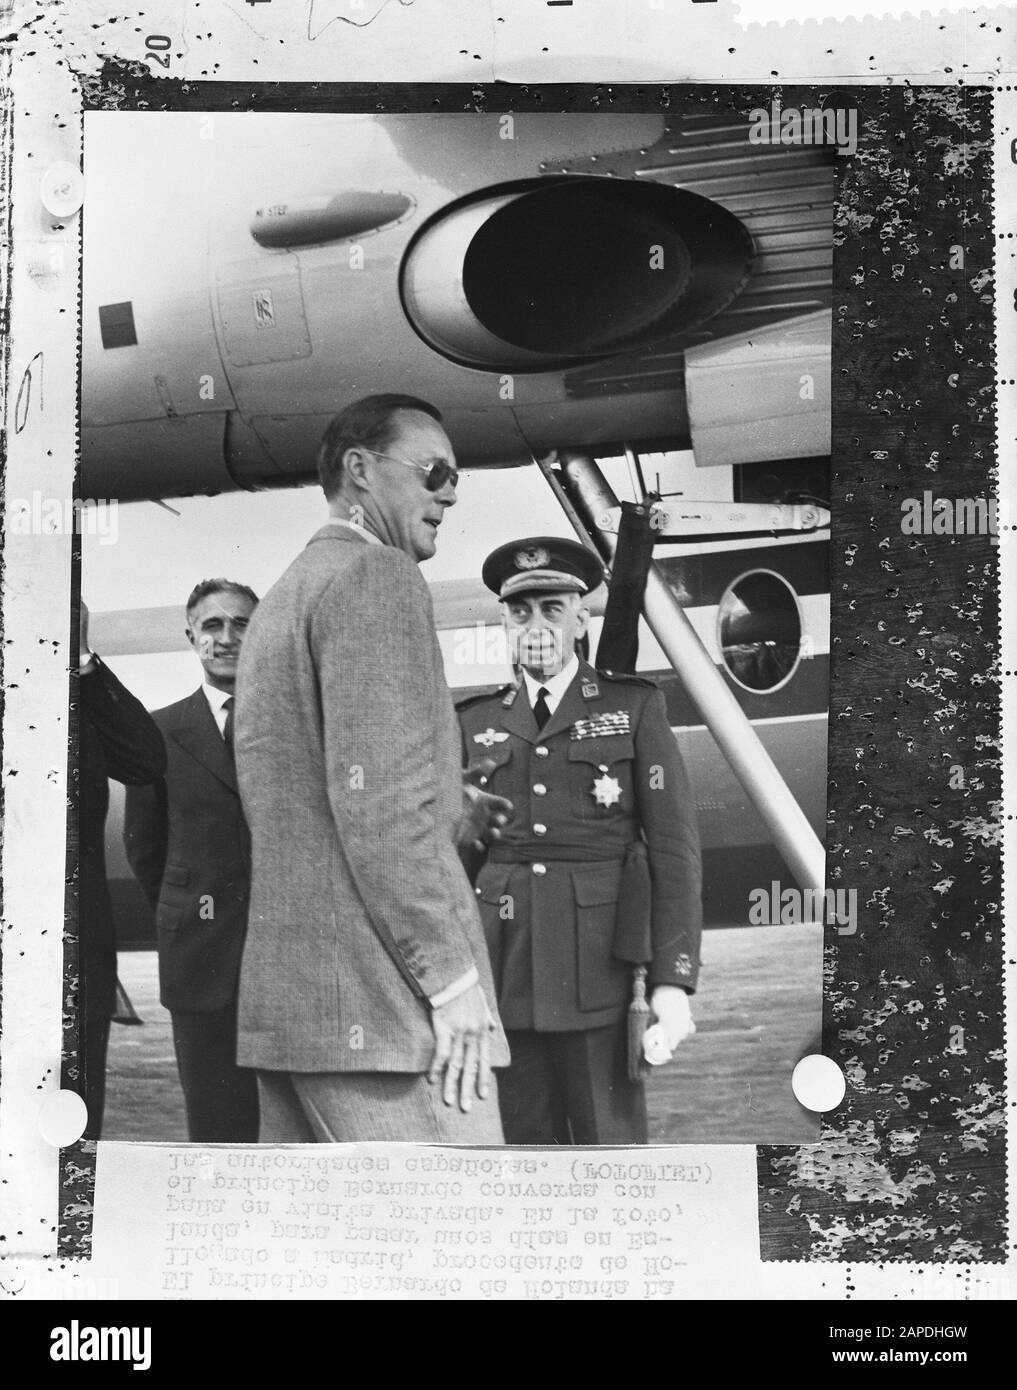 Arrival of Prince Bernhard at Madrid Airport Date: October 8, 1960 Location: Madrid Keywords: arrivals, airports Personal name: Bernhard, prince Stock Photo